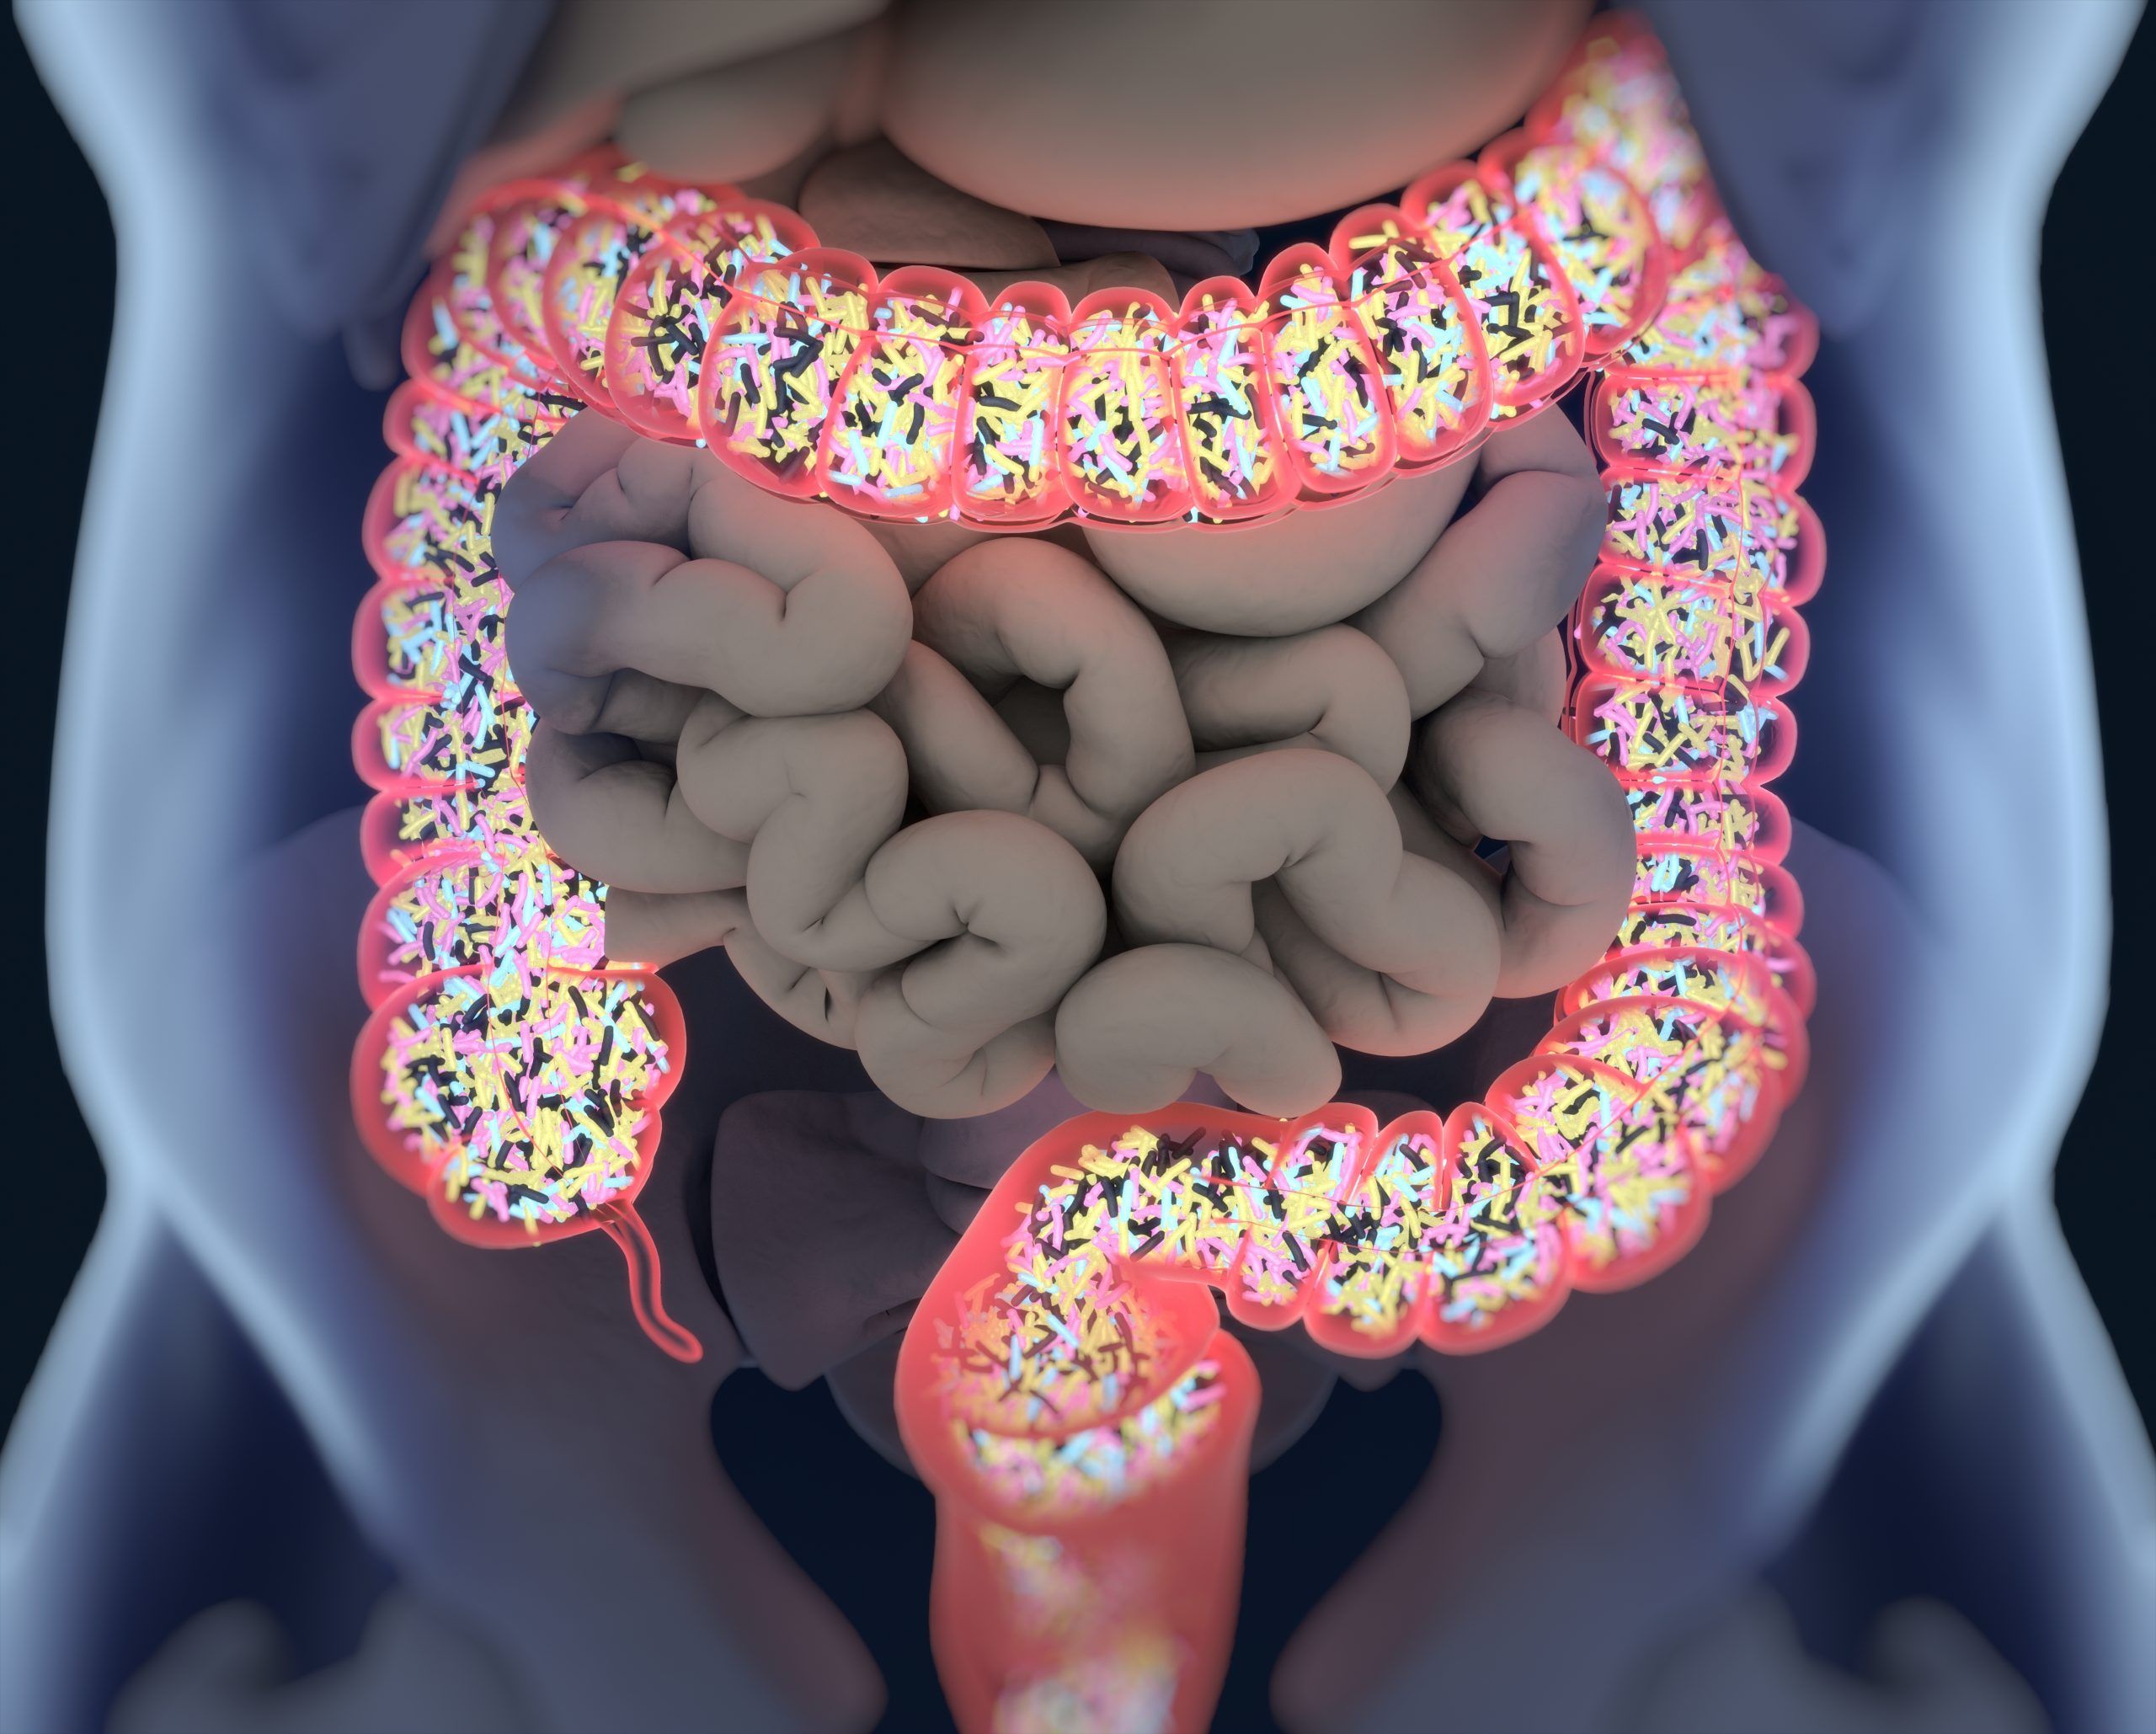 The gut microbiome is the community of micro-organisms living inside the gastrointestinal tract, which performs many beneficial functions, including educating the immune system.